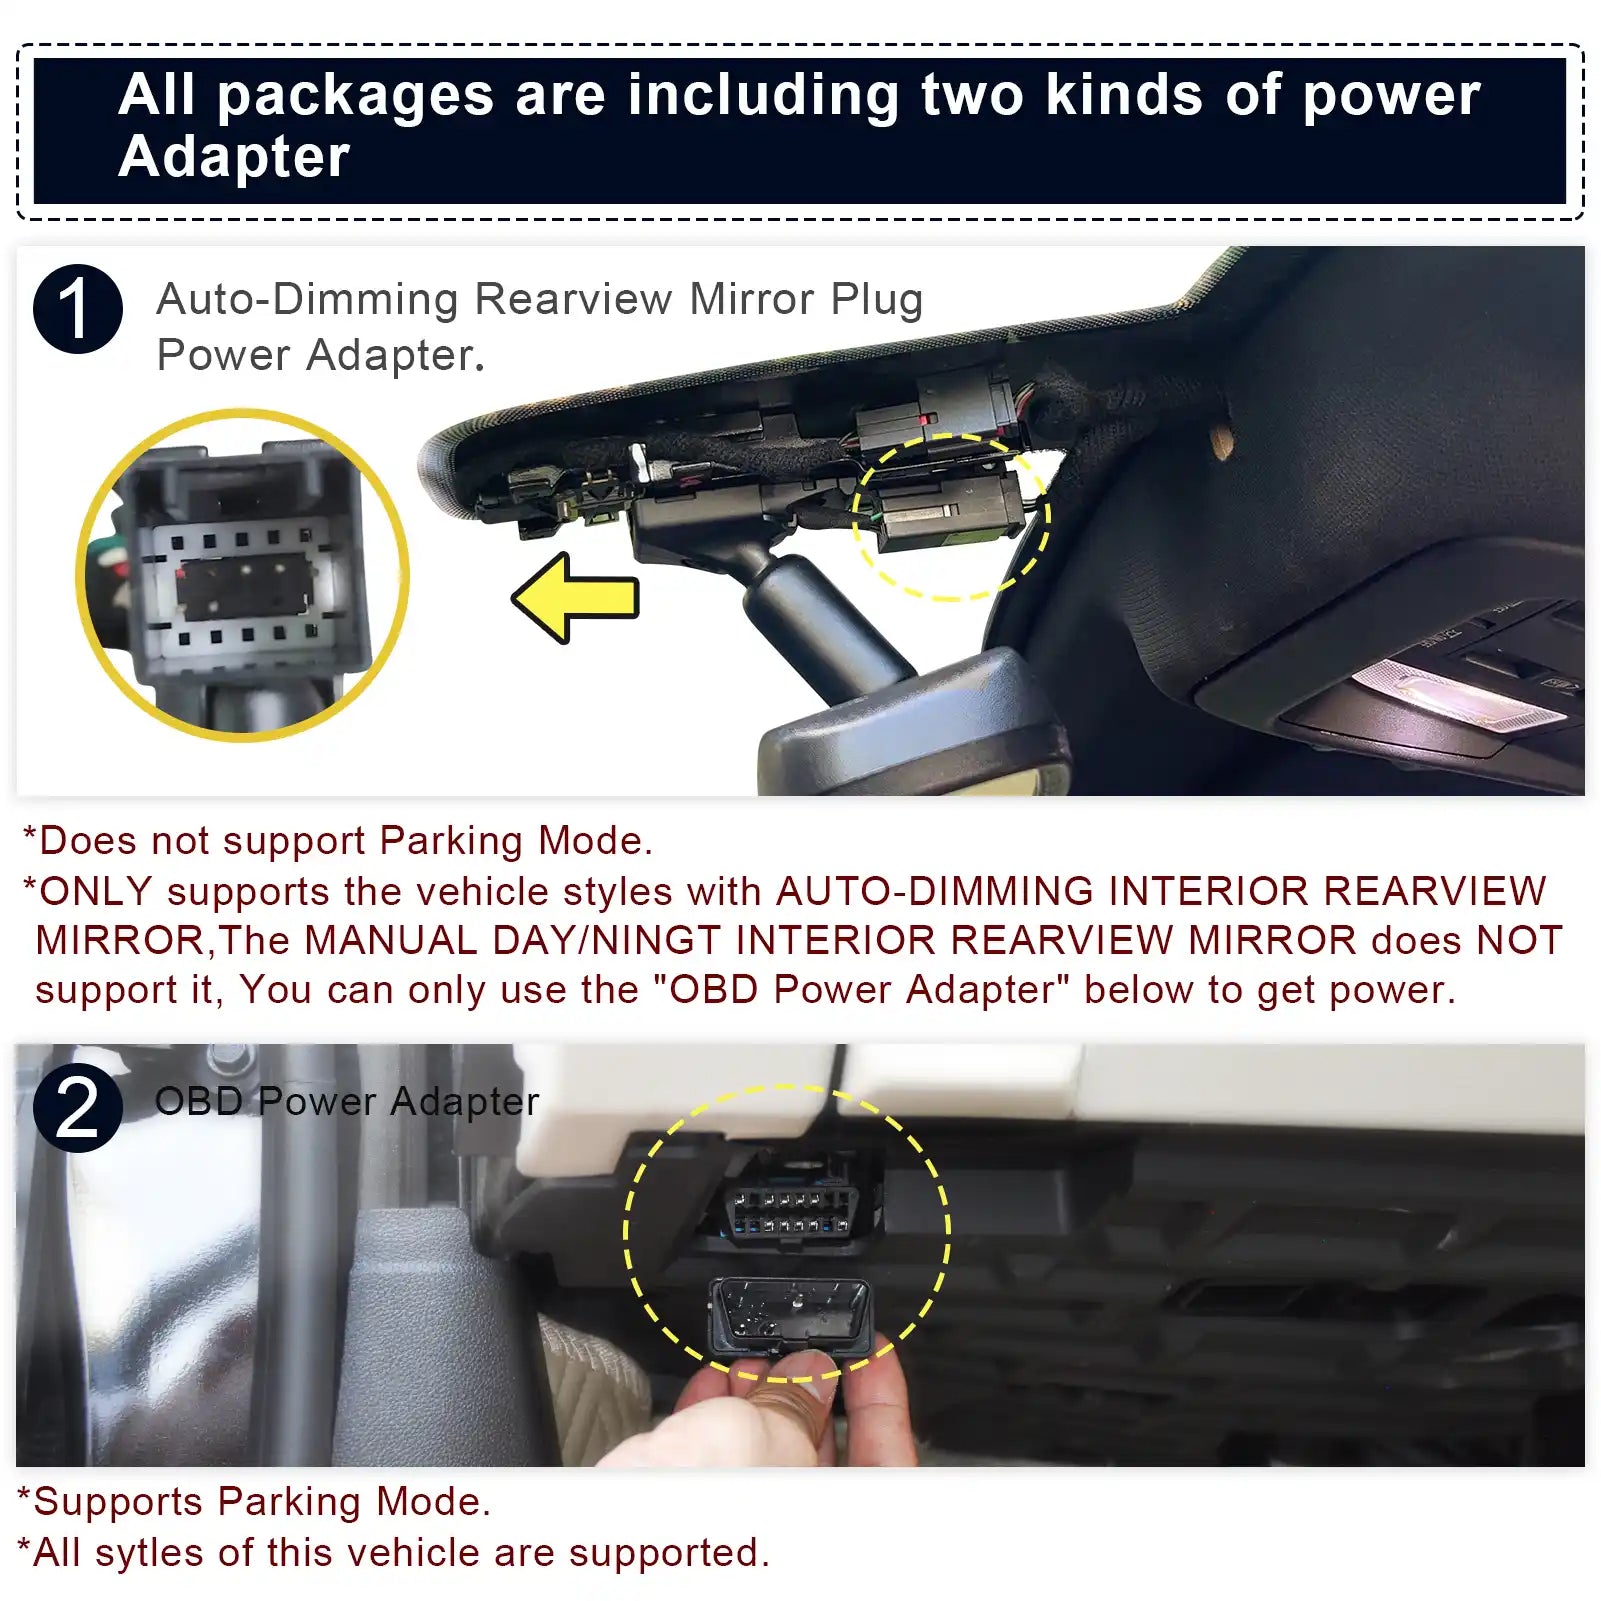 Chevy Suburban OBD power adapter 